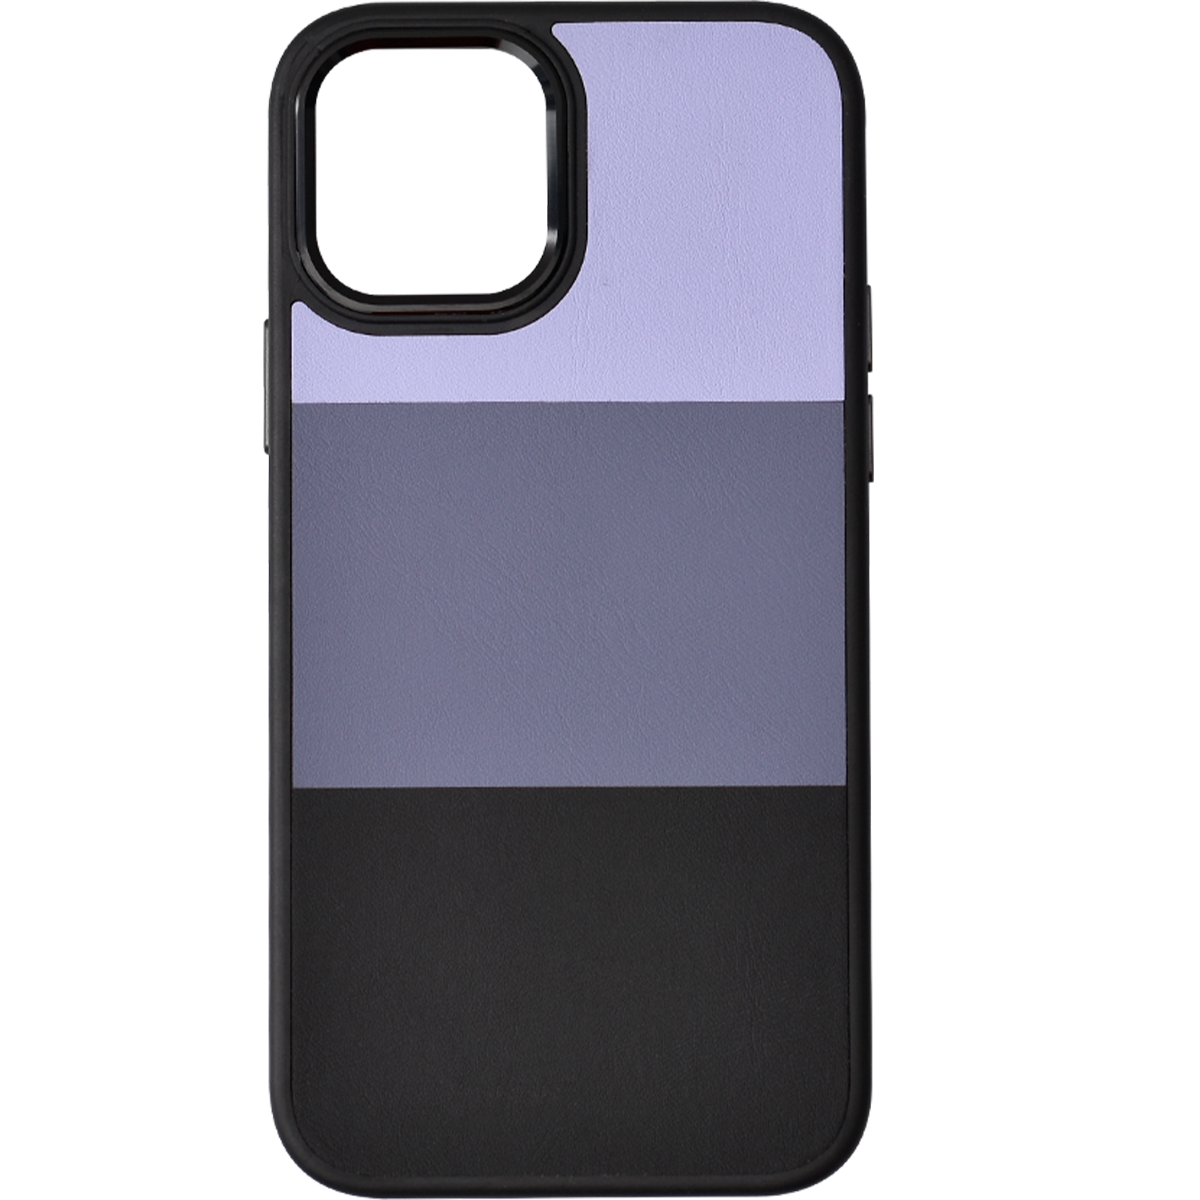 Leather Metal Case for Iphone 12 (Purple)